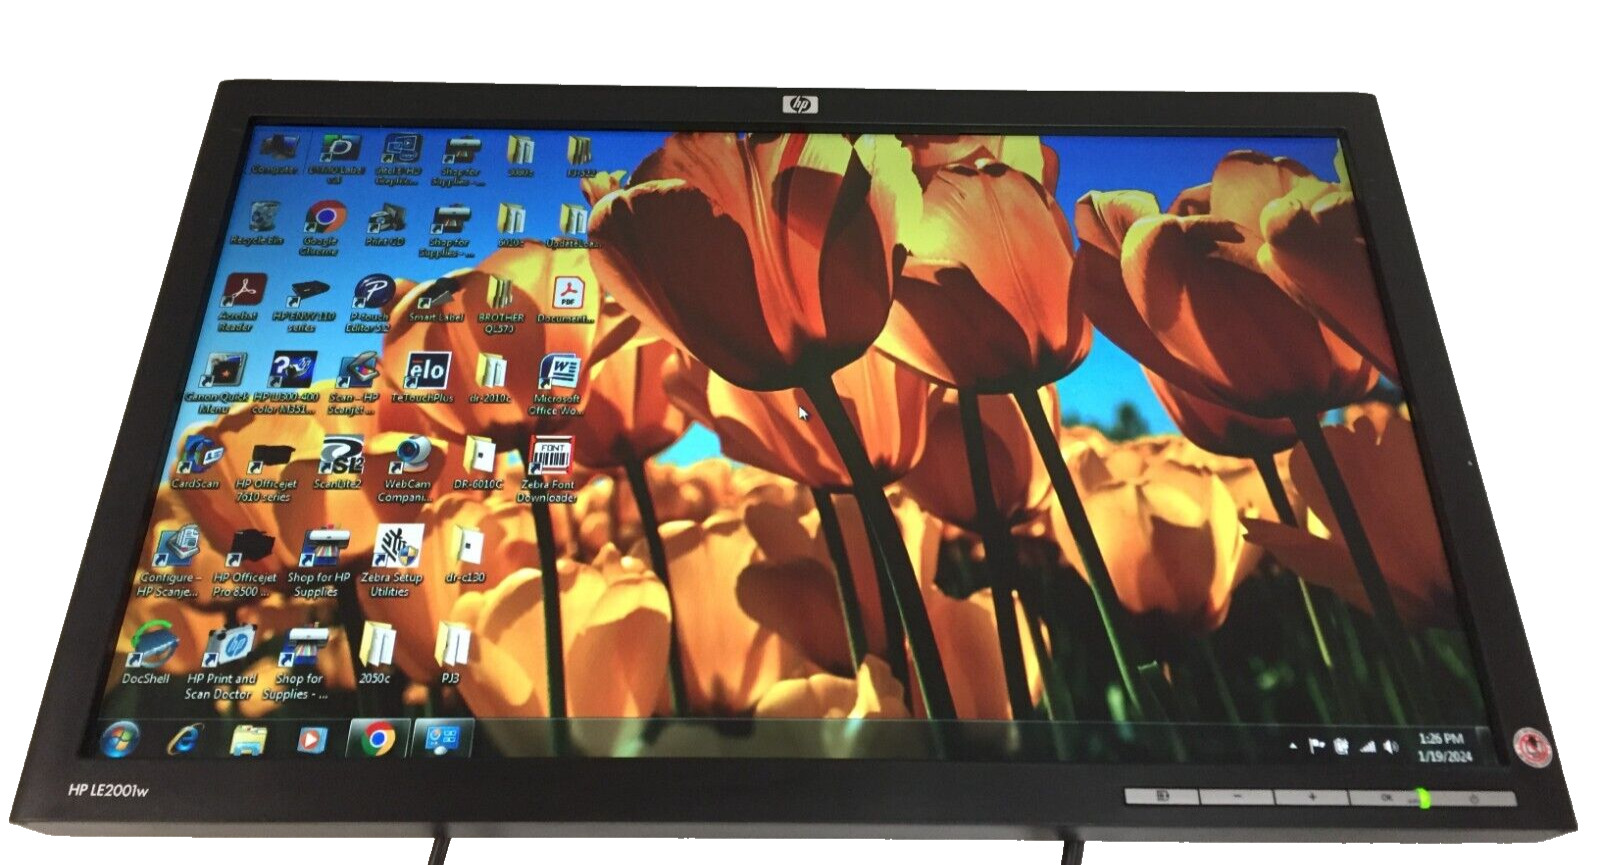 HP LE2001w 20” 1600 x 900 Widescreen LCD Monitor 16:9 VGA  No Stand/Cables